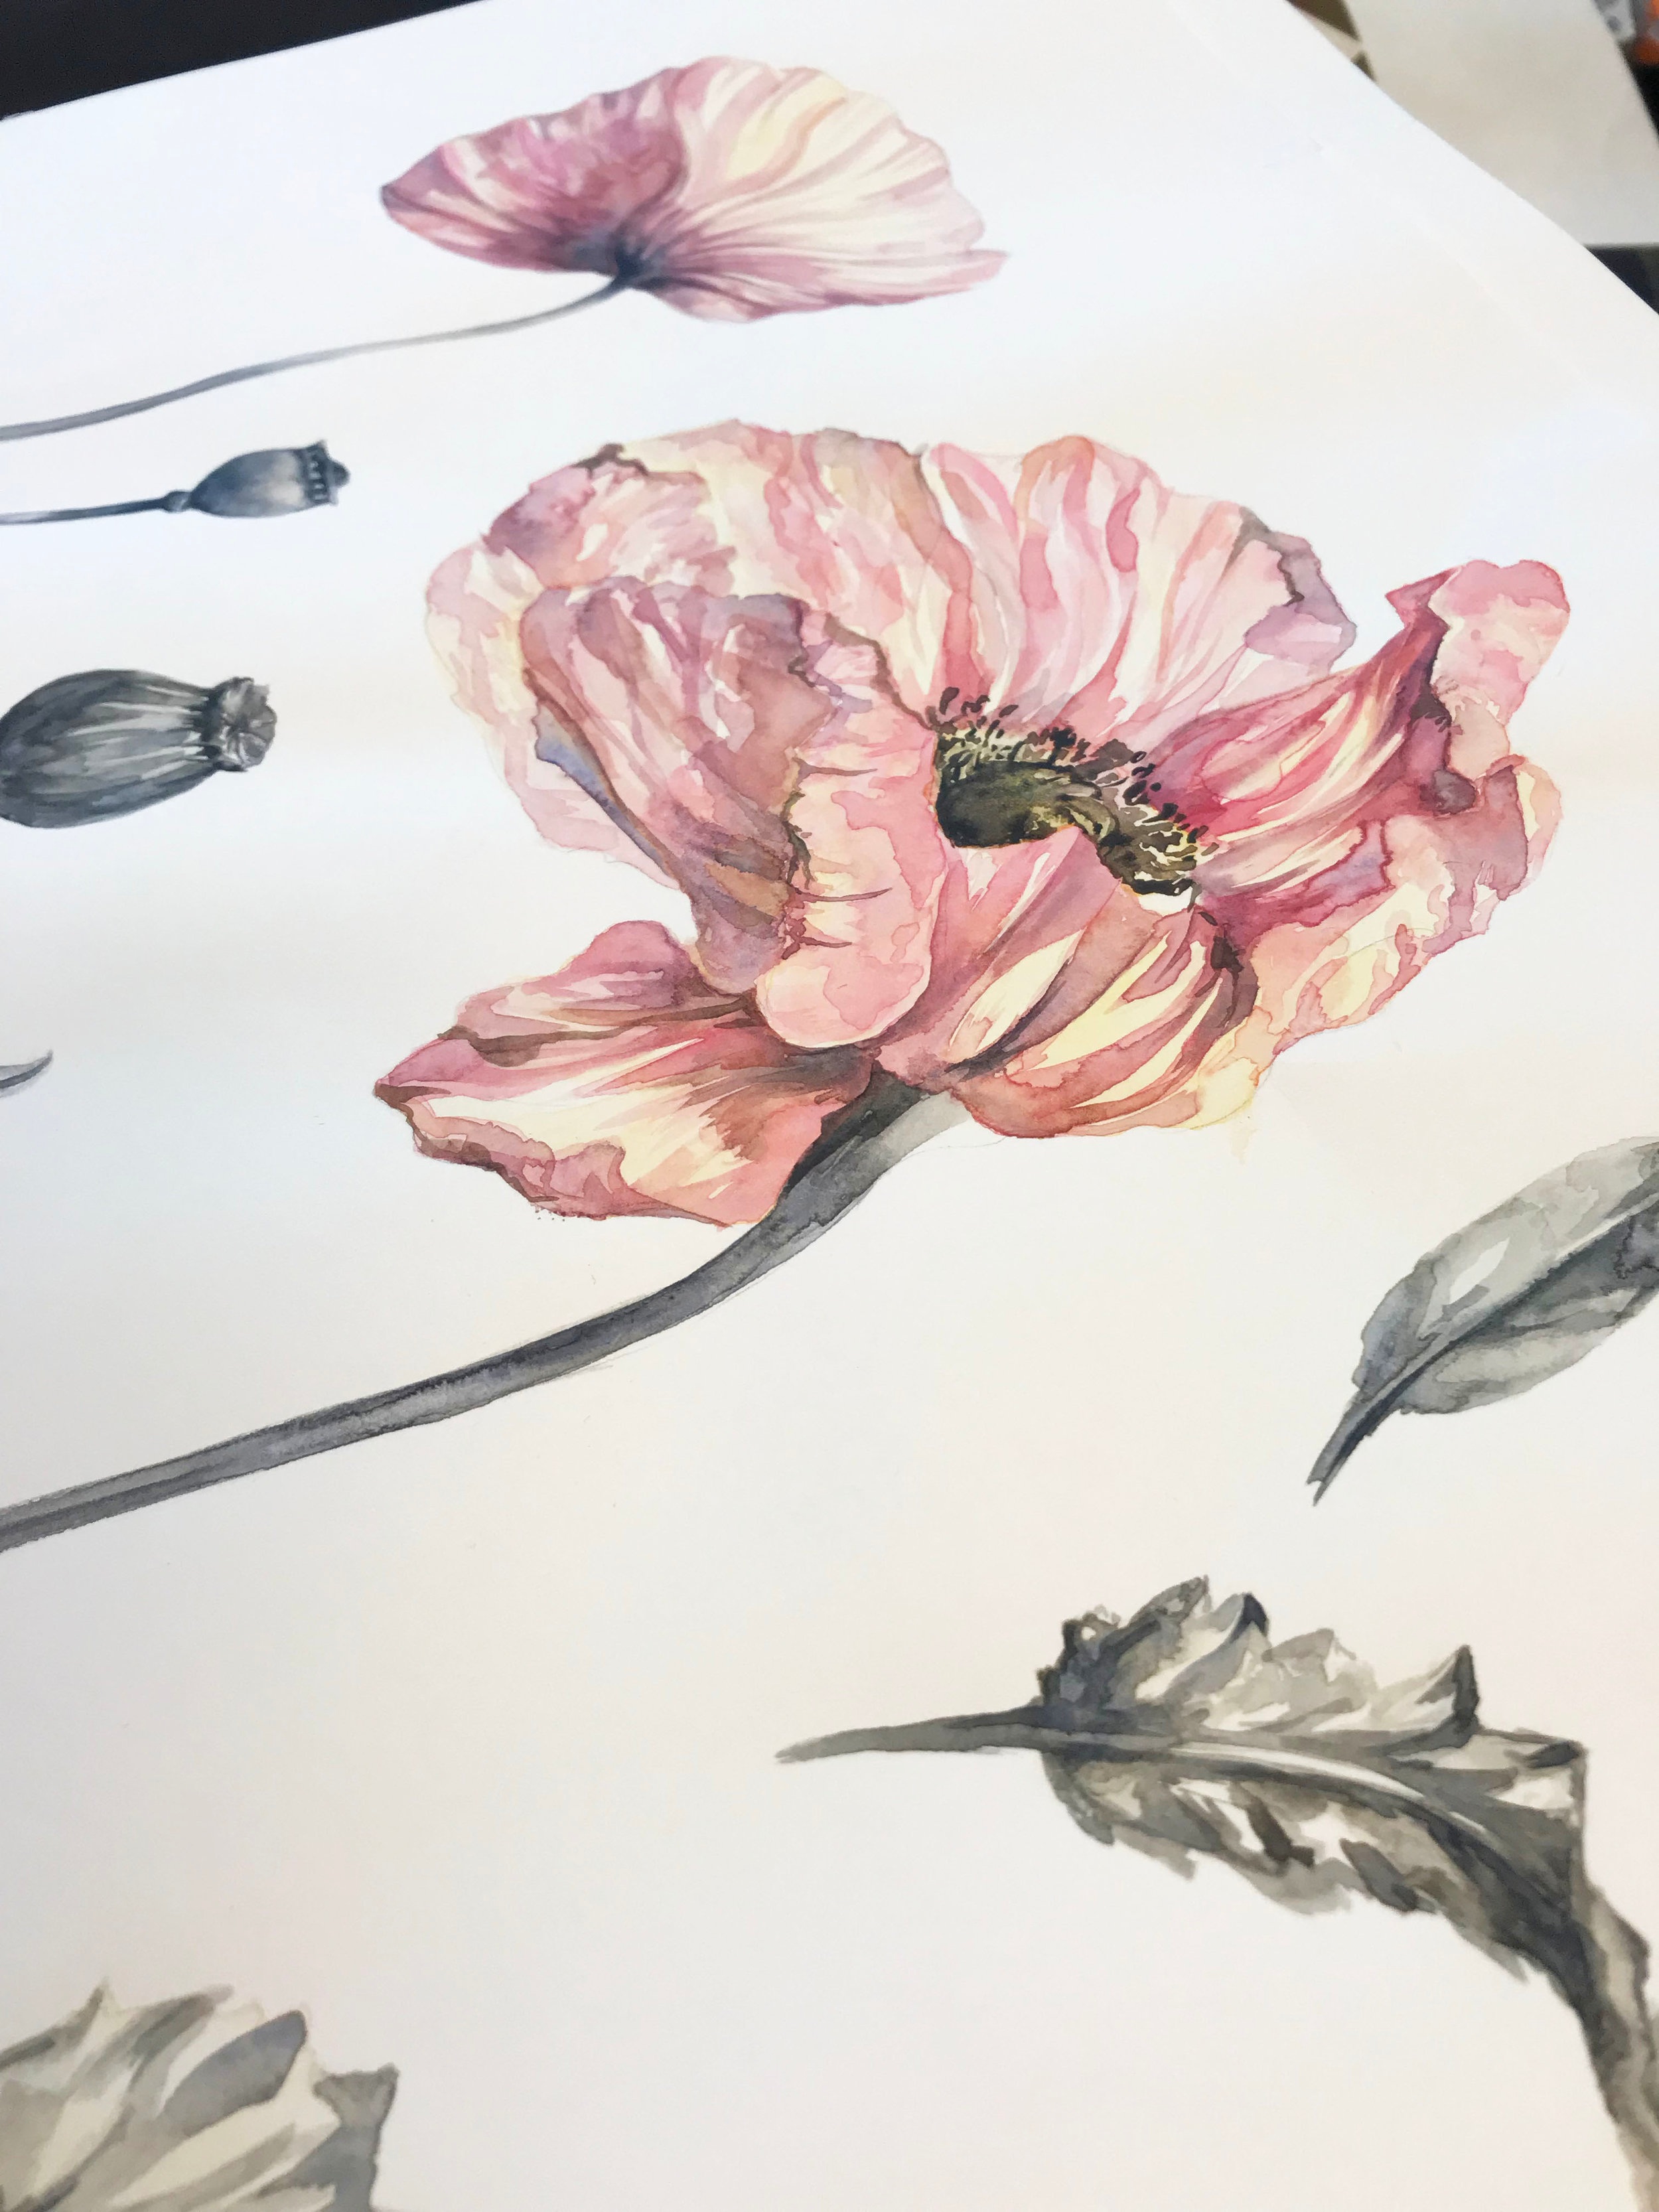 Artwork detail for 'Poppy Fields' from H&amp;M Conscious Collection Spring 2019